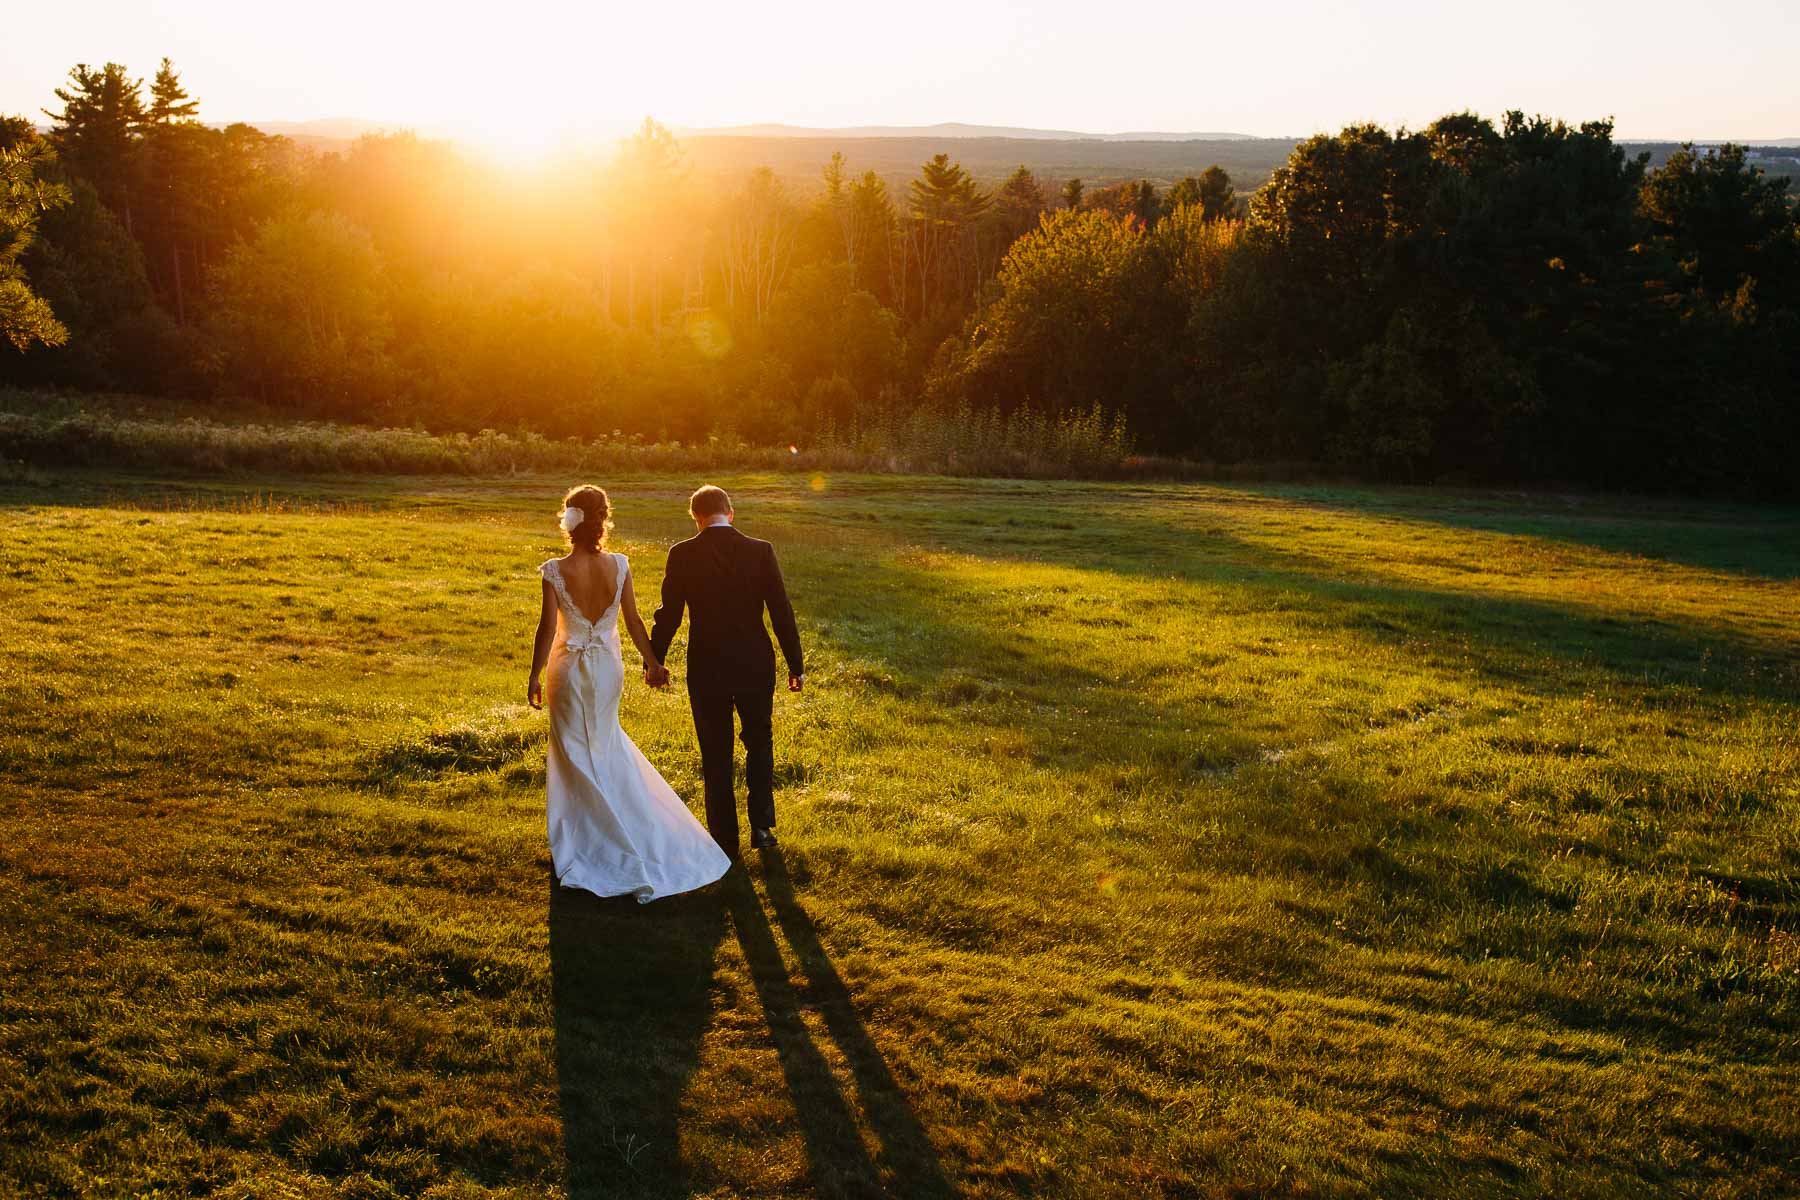 Fall wedding at Fruitlands Museum of Annelise and Niklas | Kelly Benvenuto Photography | Boston wedding photographer